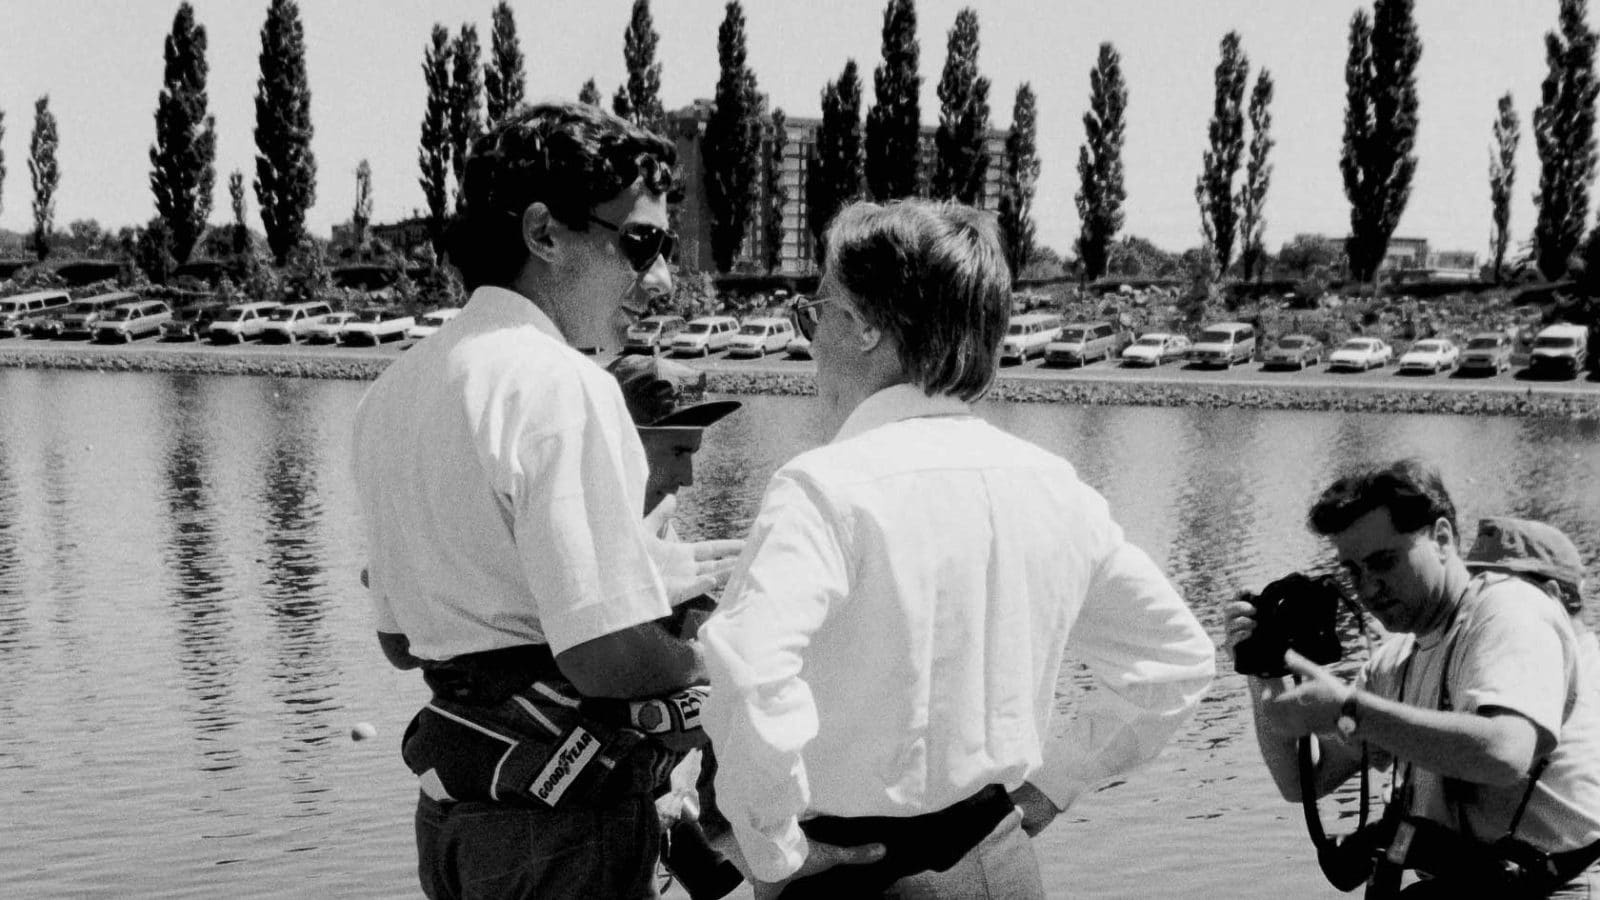 Senna and Bernie chat by a river